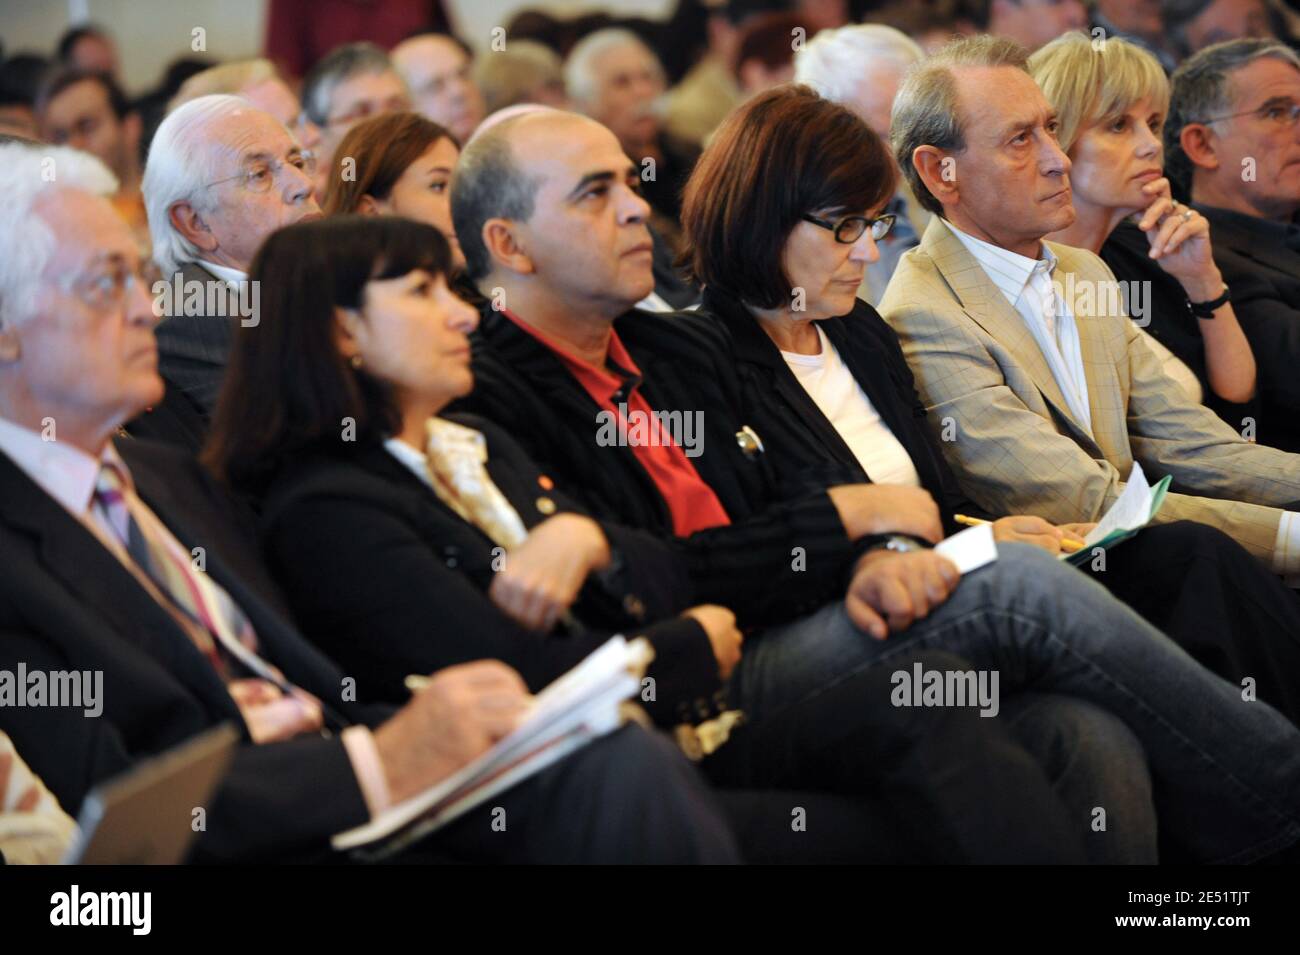 Former Socialist Prime Minister Lionel Jospin, Anne Hidalgo, Paris mayor Bertrand Delanoe and Elisabeth Guigou during meeting with Socialist militants at the Mutualite in Paris, France on May 24, 2008 as Socialist party leadership is under competition. Photo by Elodie Gregoire/ABACAPRESS.COM Stock Photo